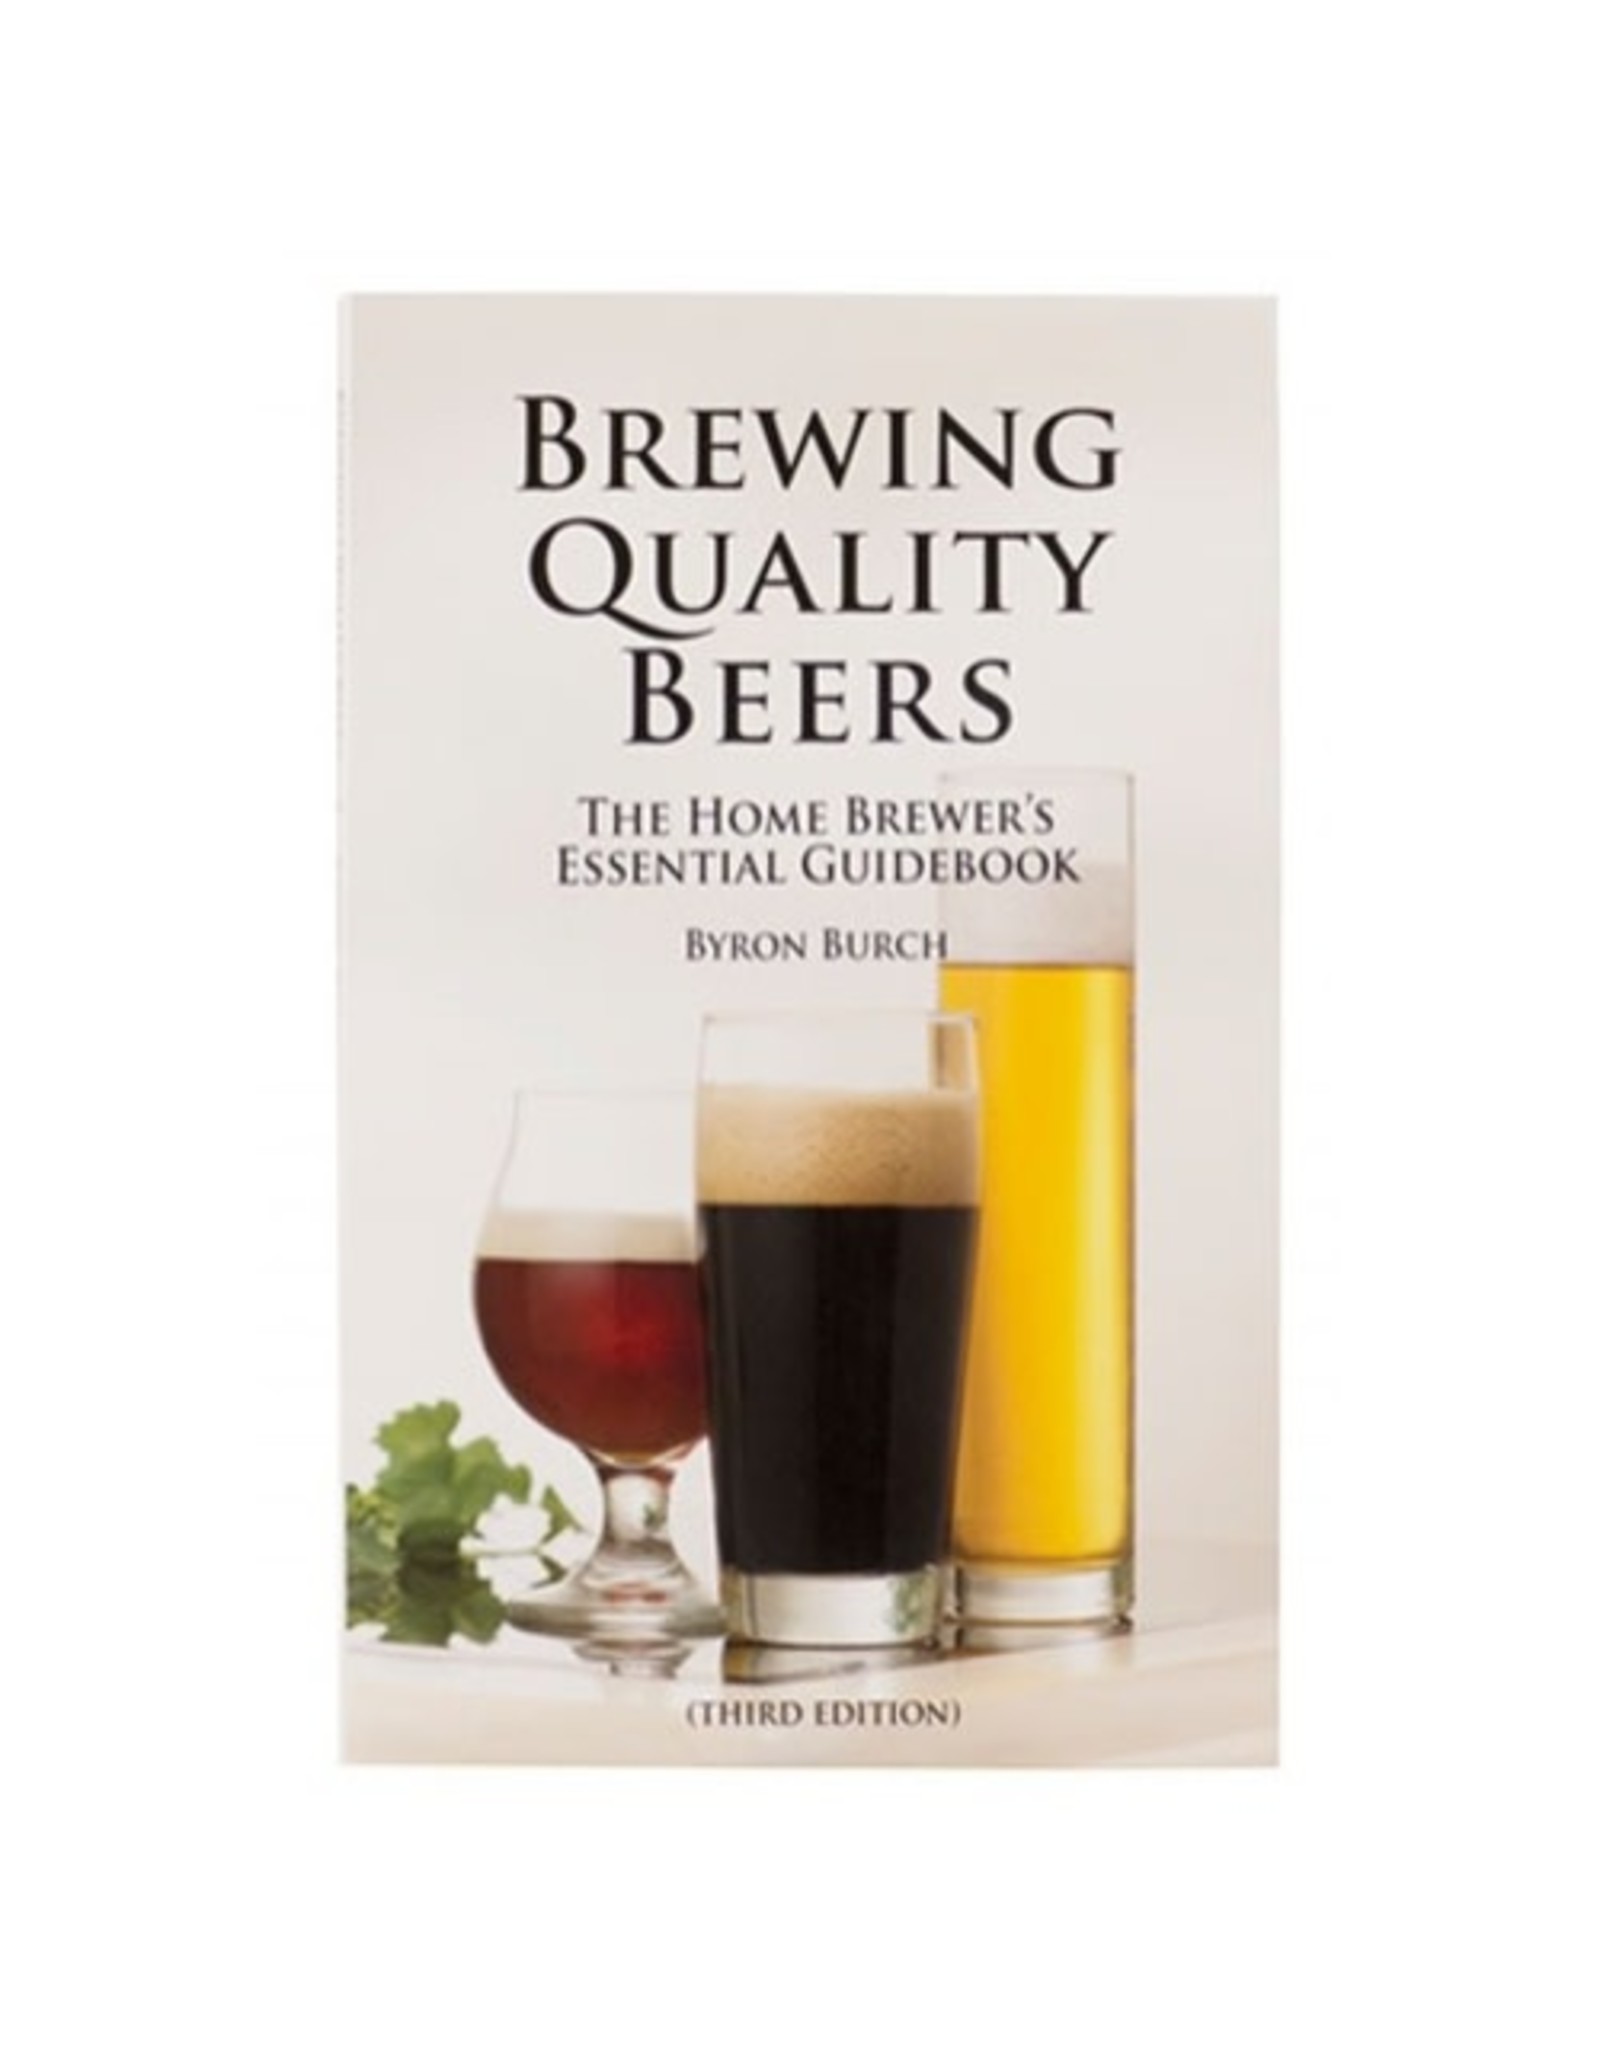 Brewing Quality Beers book